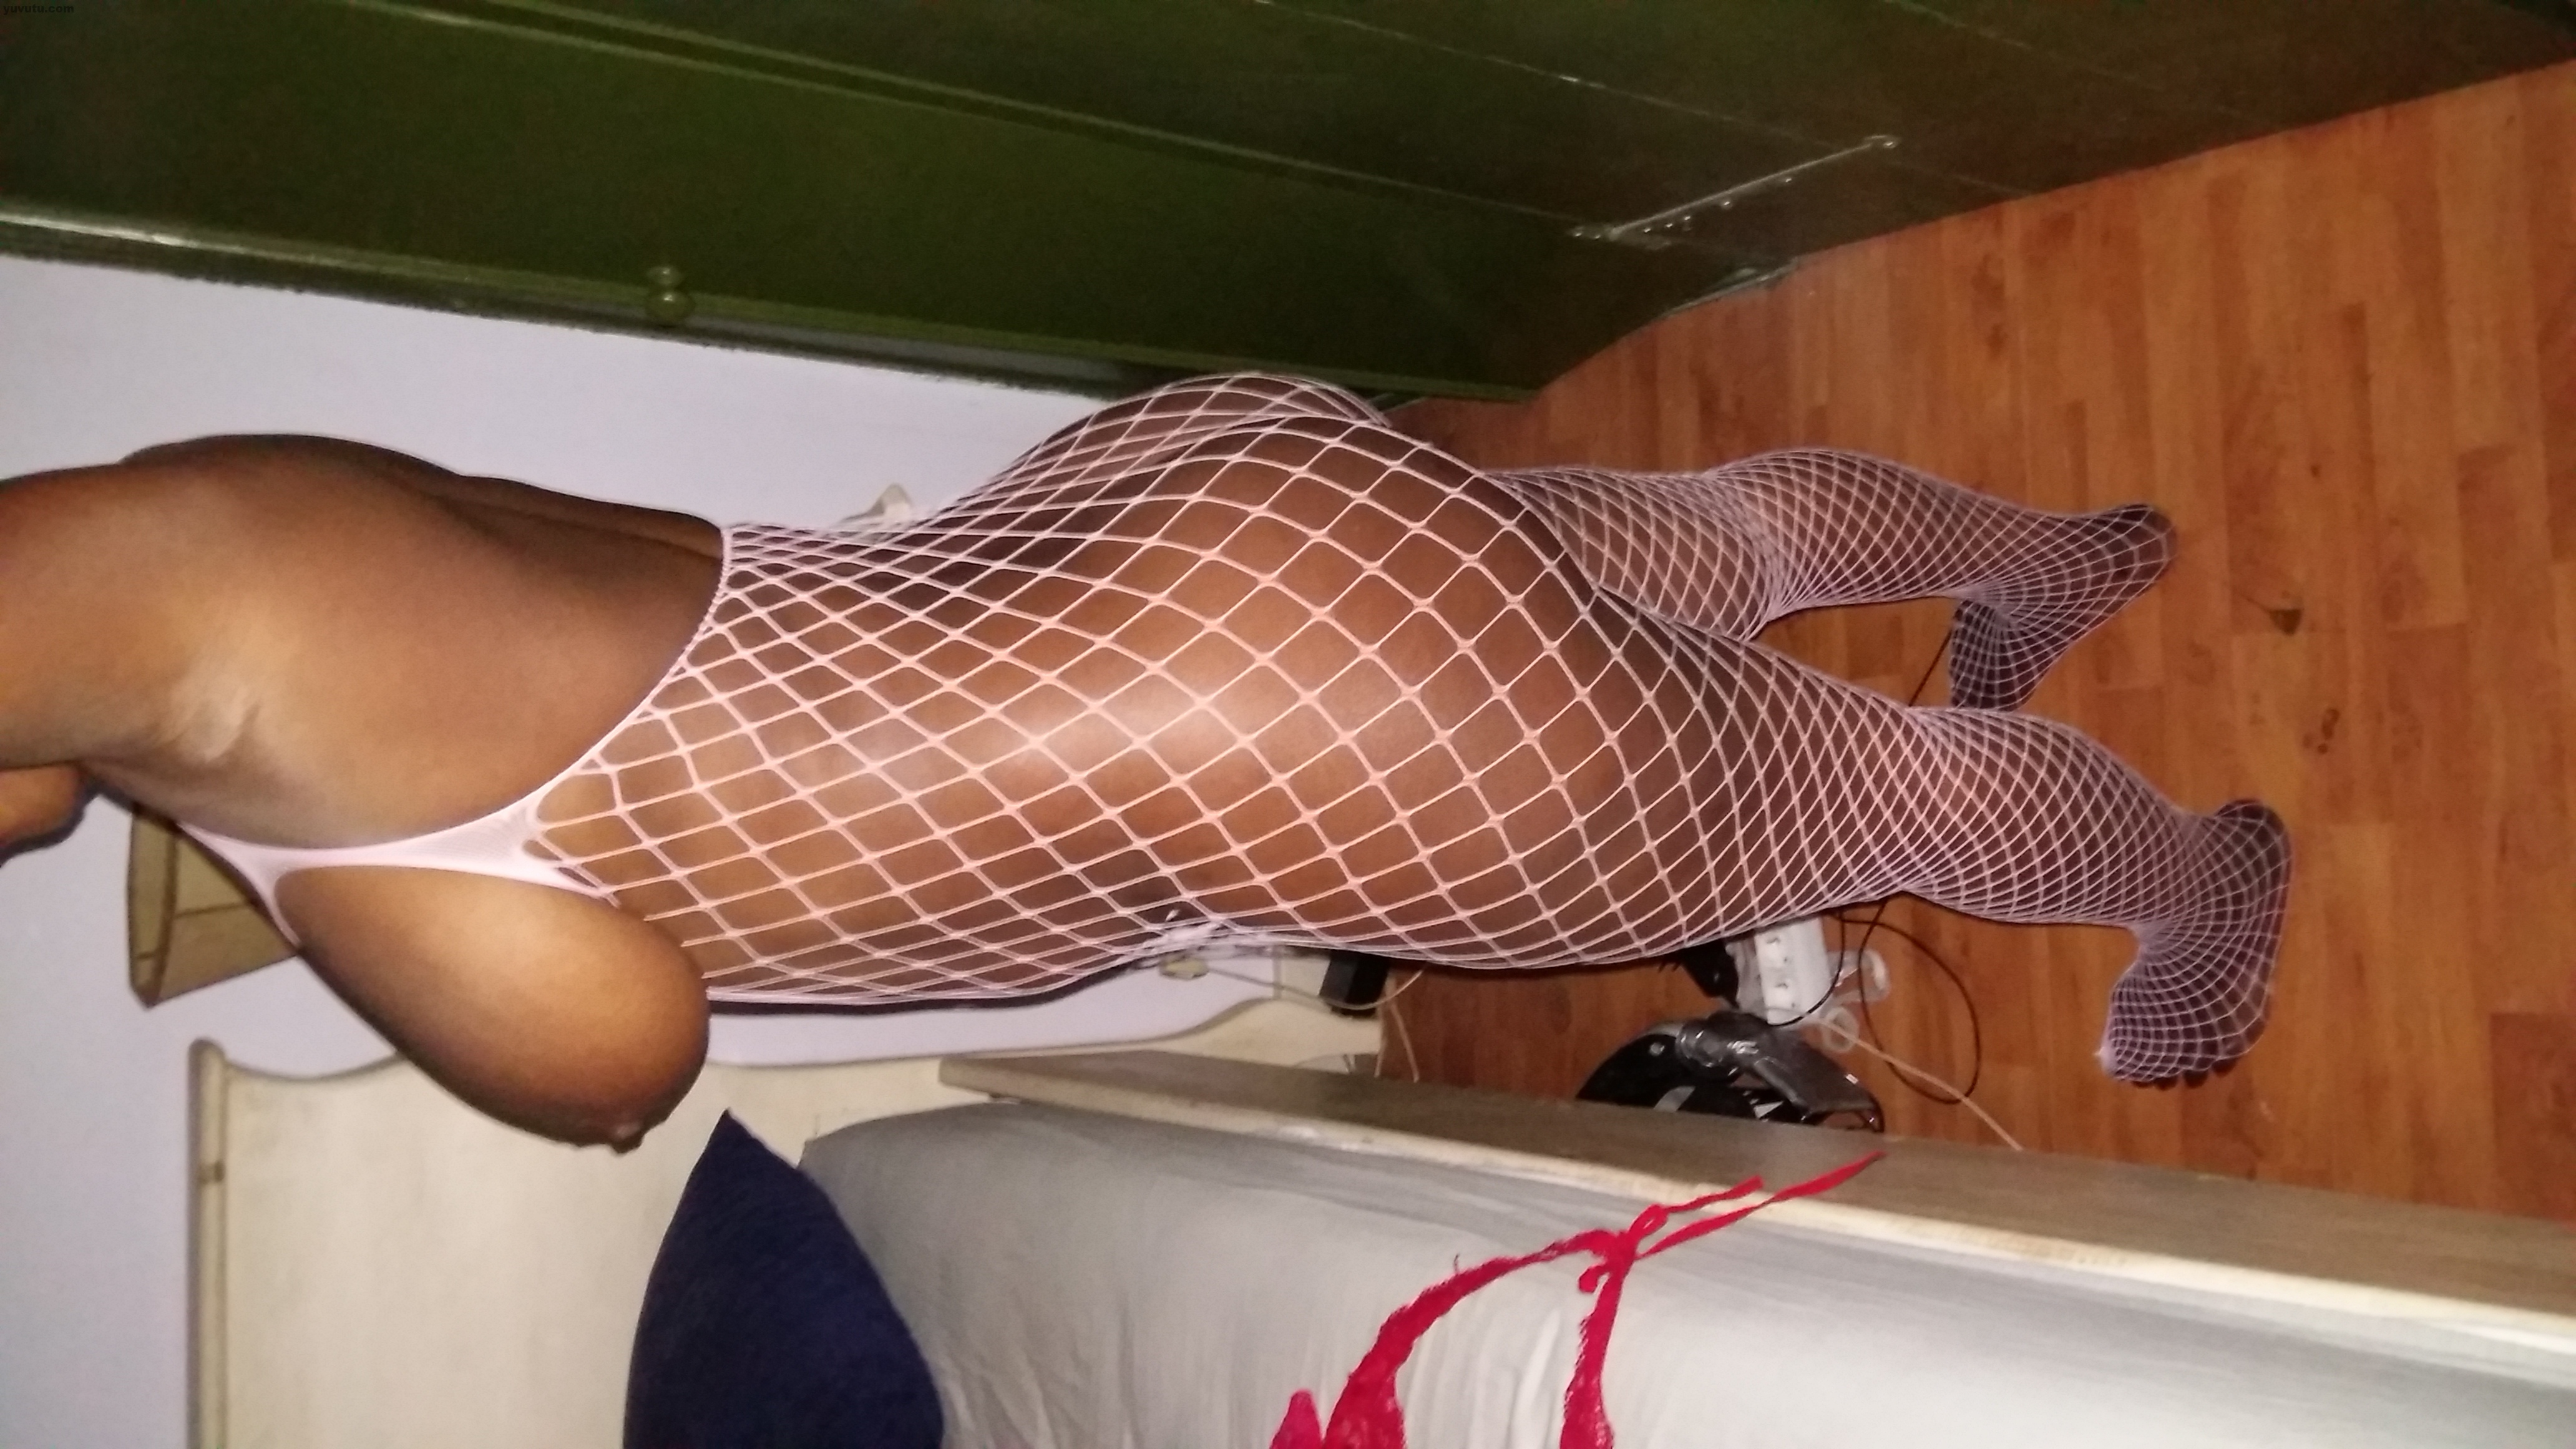 Busty Ebony MILF Ndey in Fishnet Bodystocking On Yuvutu Homemade Amateur Porn Movies And XXX Sex Videos picture pic